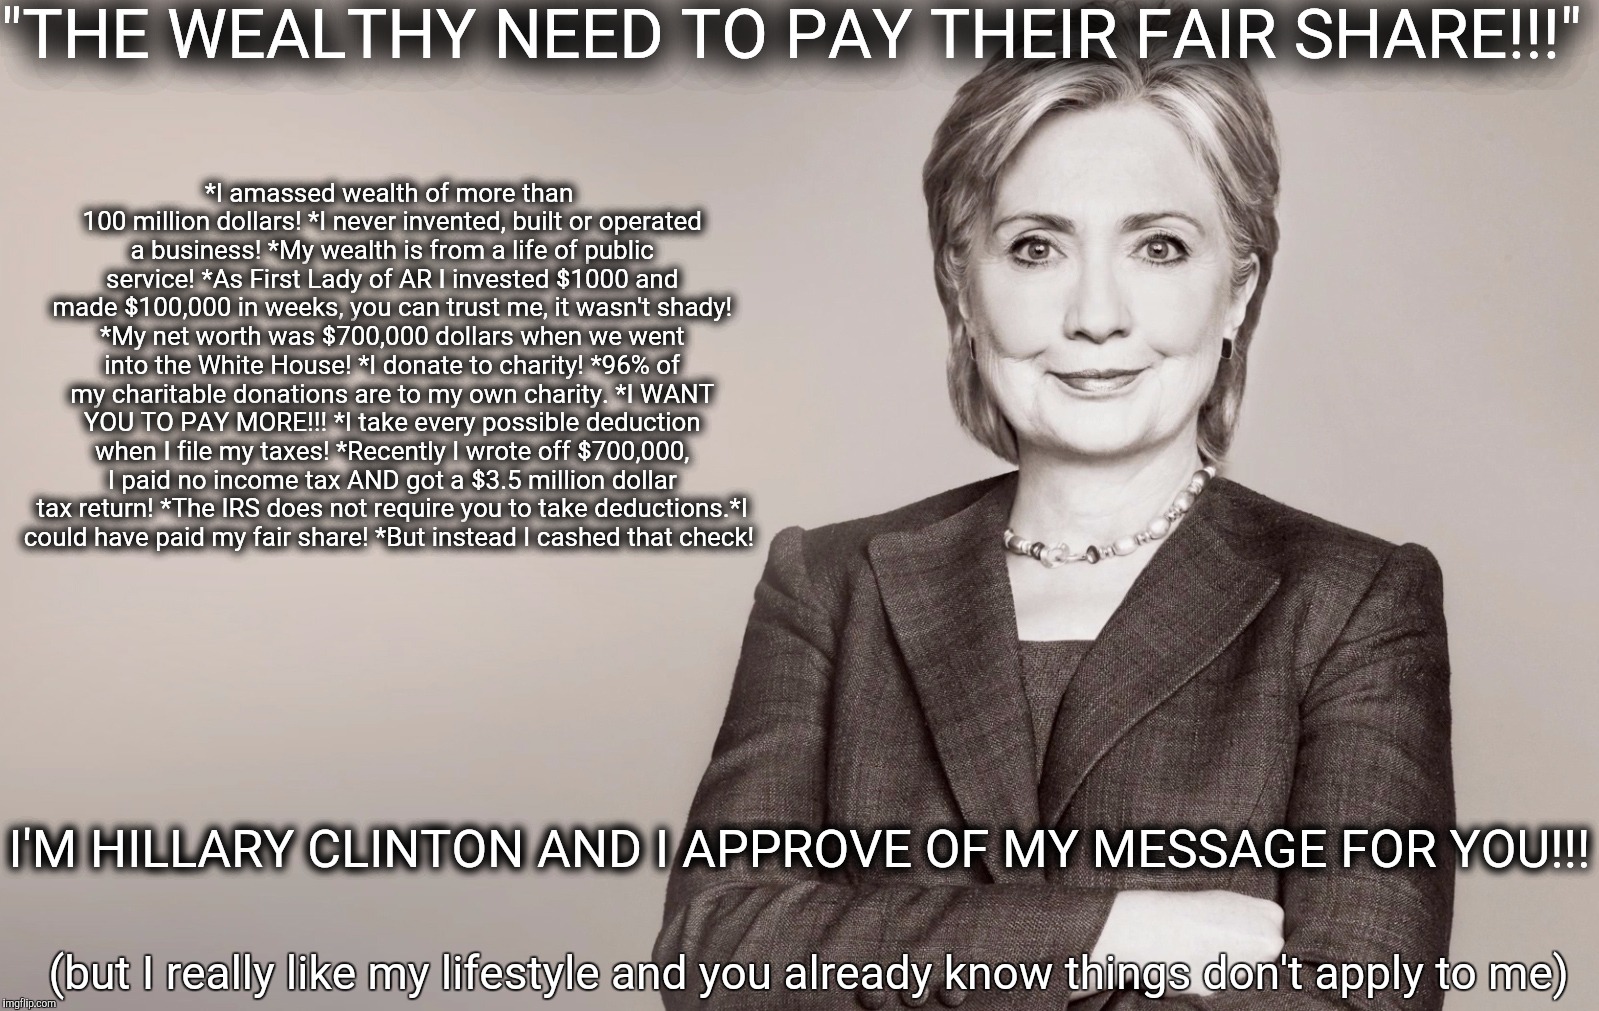 Hillary Clinton | "THE WEALTHY NEED TO PAY THEIR FAIR SHARE!!!"; *I amassed wealth of more than 100 million dollars! *I never invented, built or operated a business! *My wealth is from a life of public service! *As First Lady of AR I invested $1000 and made $100,000 in weeks, you can trust me, it wasn't shady! *My net worth was $700,000 dollars when we went into the White House! *I donate to charity! *96% of my charitable donations are to my own charity. *I WANT YOU TO PAY MORE!!! *I take every possible deduction when I file my taxes! *Recently I wrote off $700,000, I paid no income tax AND got a $3.5 million dollar tax return! *The IRS does not require you to take deductions.*I could have paid my fair share! *But instead I cashed that check! I'M HILLARY CLINTON AND I APPROVE OF MY MESSAGE FOR YOU!!! (but I really like my lifestyle and you already know things don't apply to me) | image tagged in hillary clinton | made w/ Imgflip meme maker